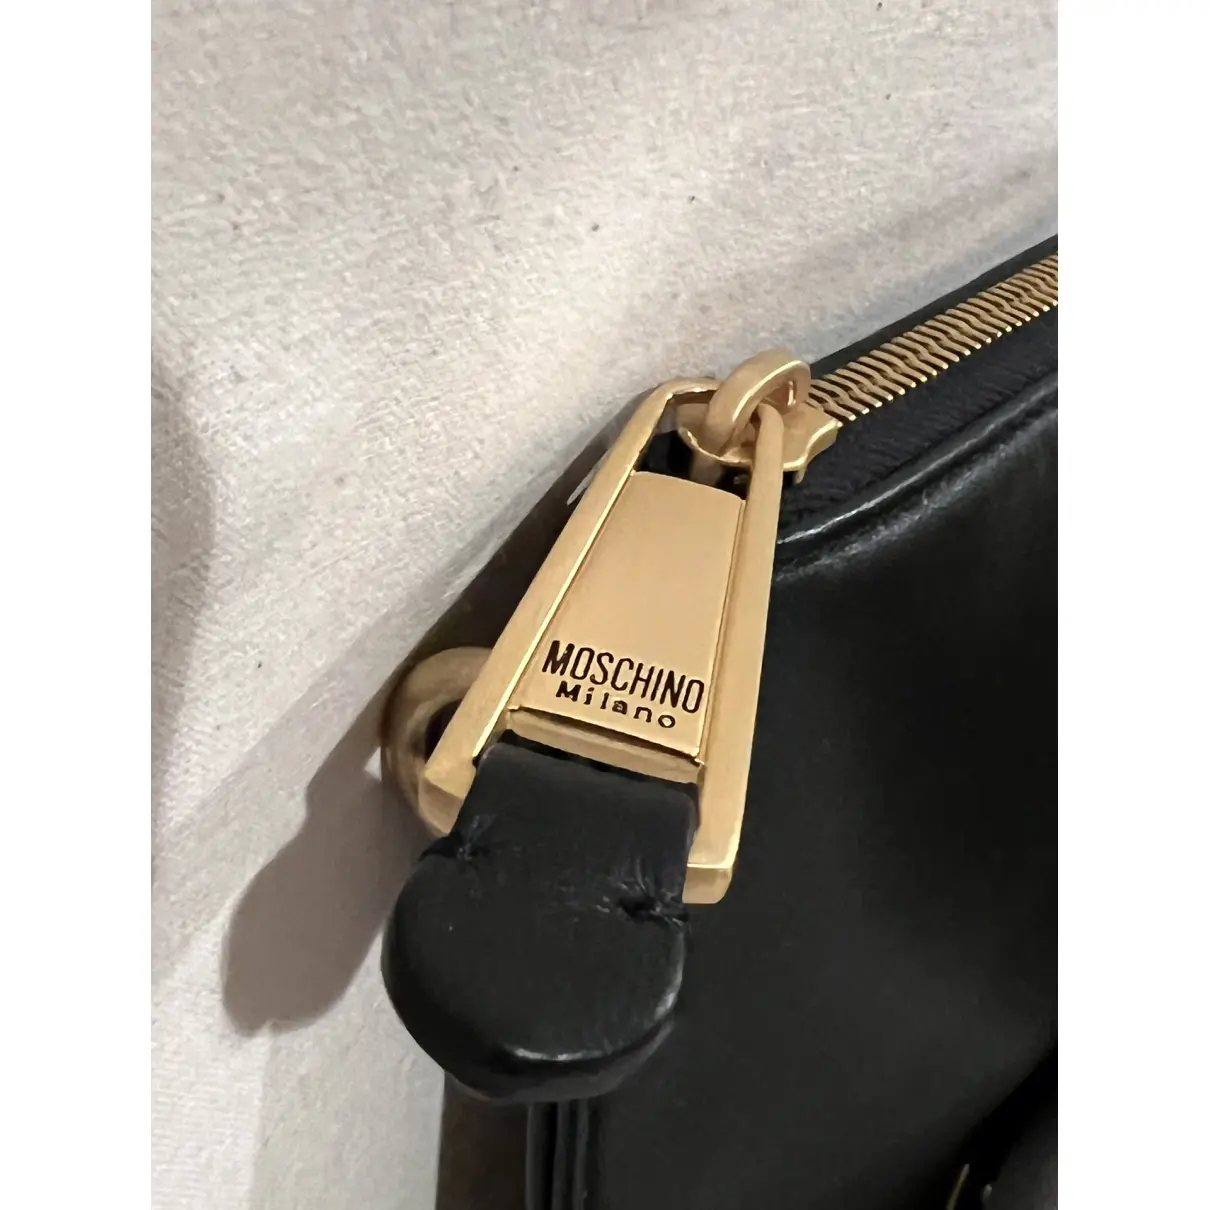 Leather clutch bag Moschino